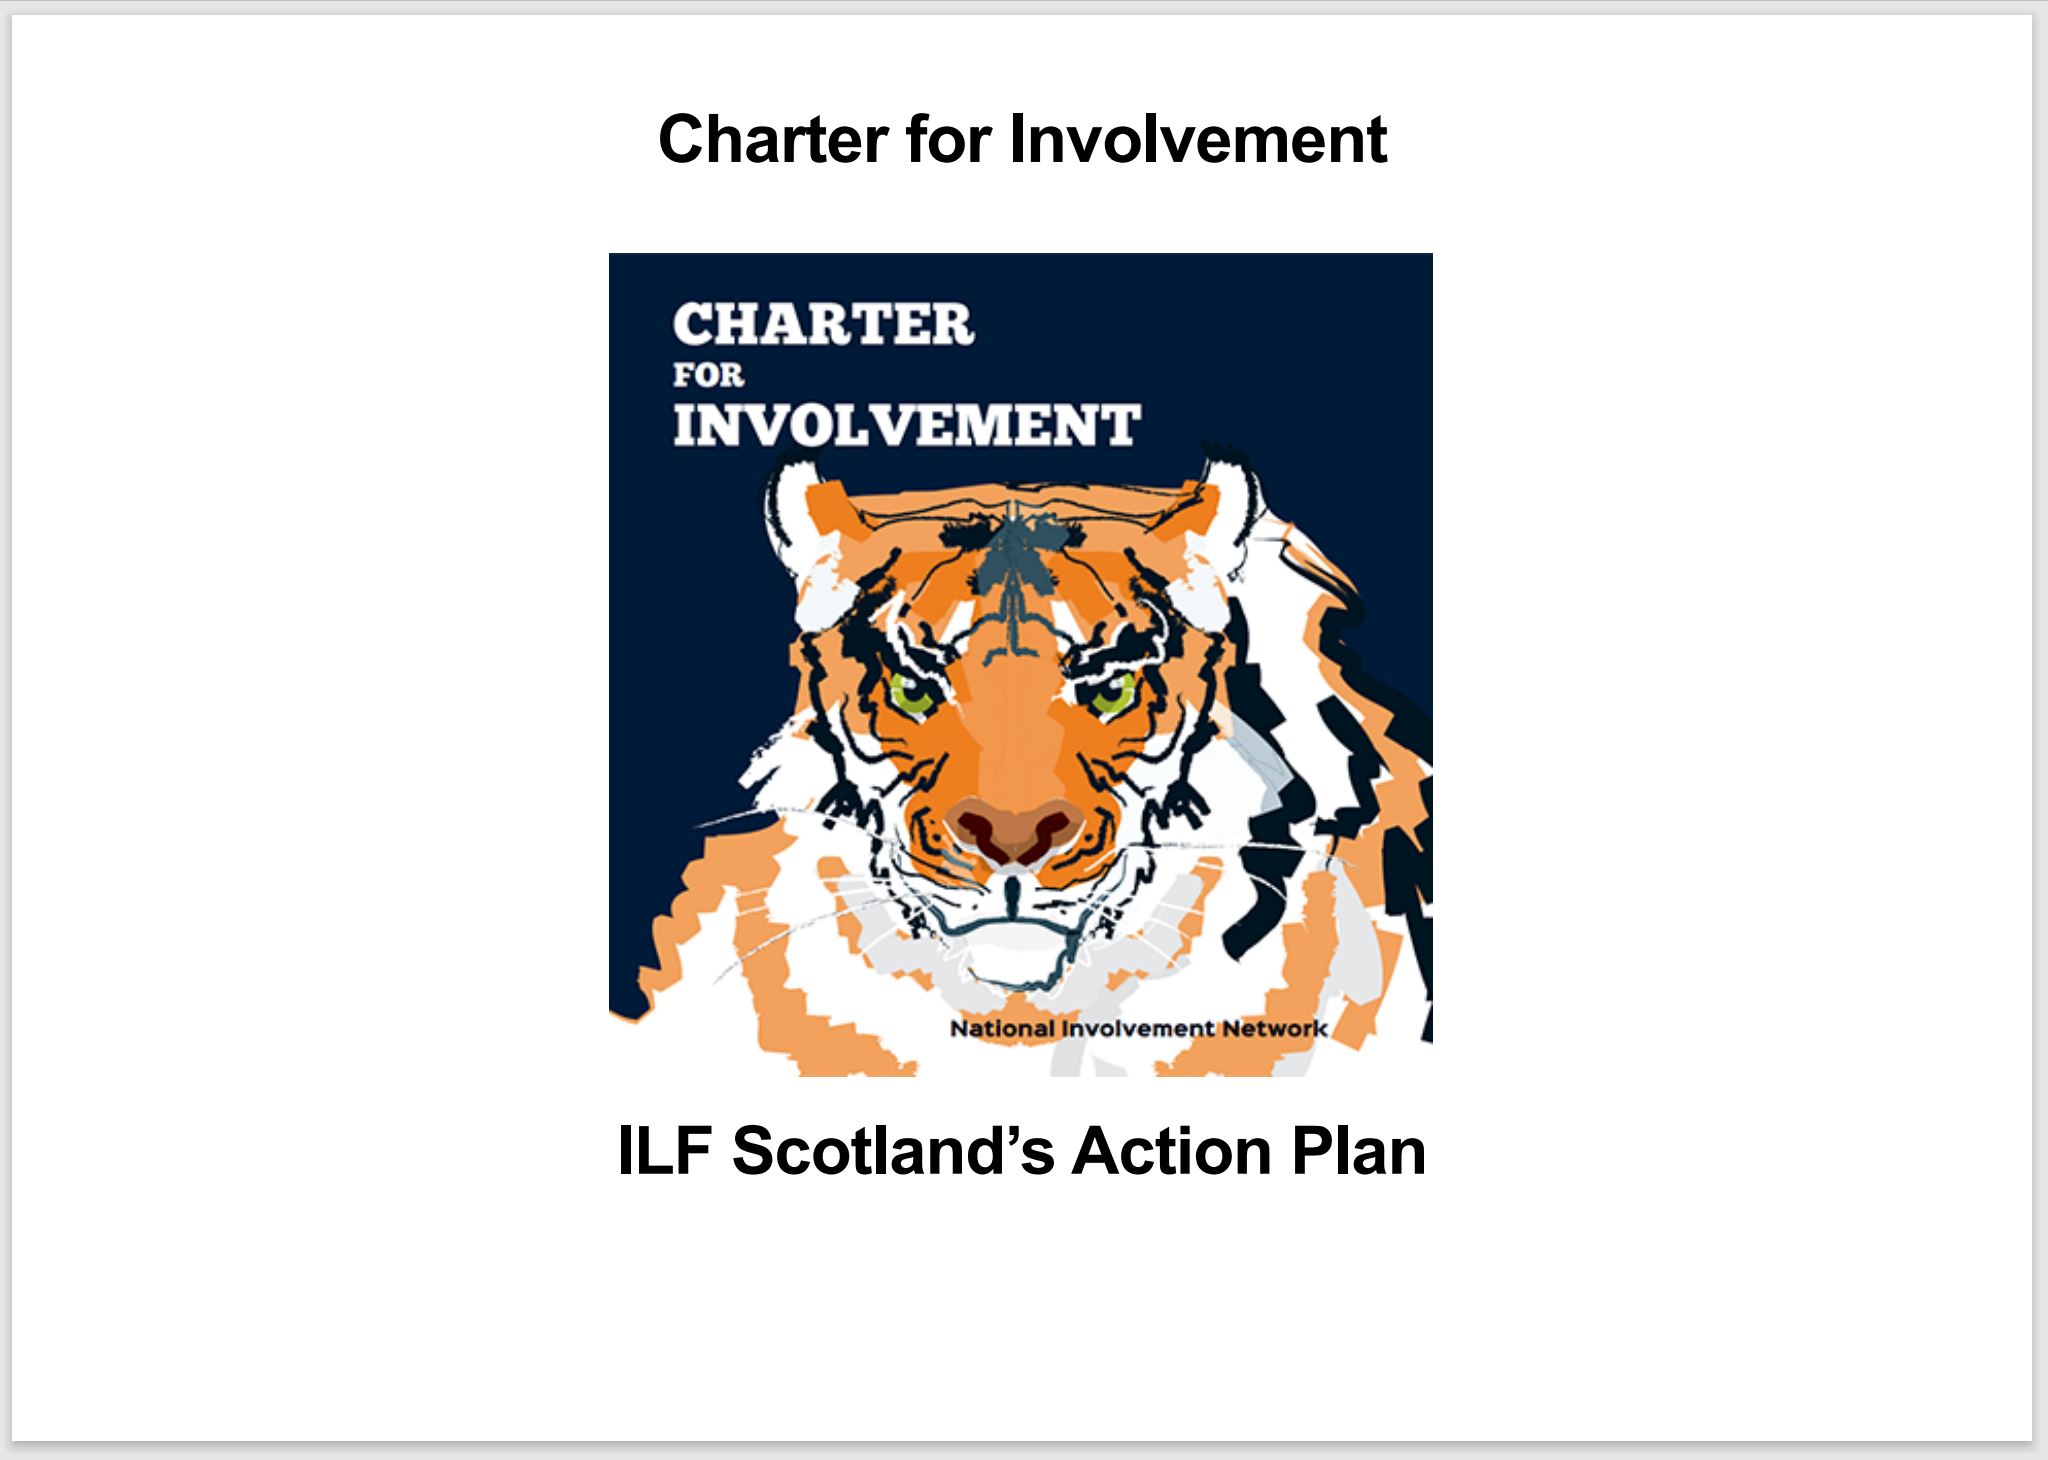 Charter for Involvement Action Plan cover, showing tiger logo and the words "Charter for Involvement, ILF Scotland's Action Plan".